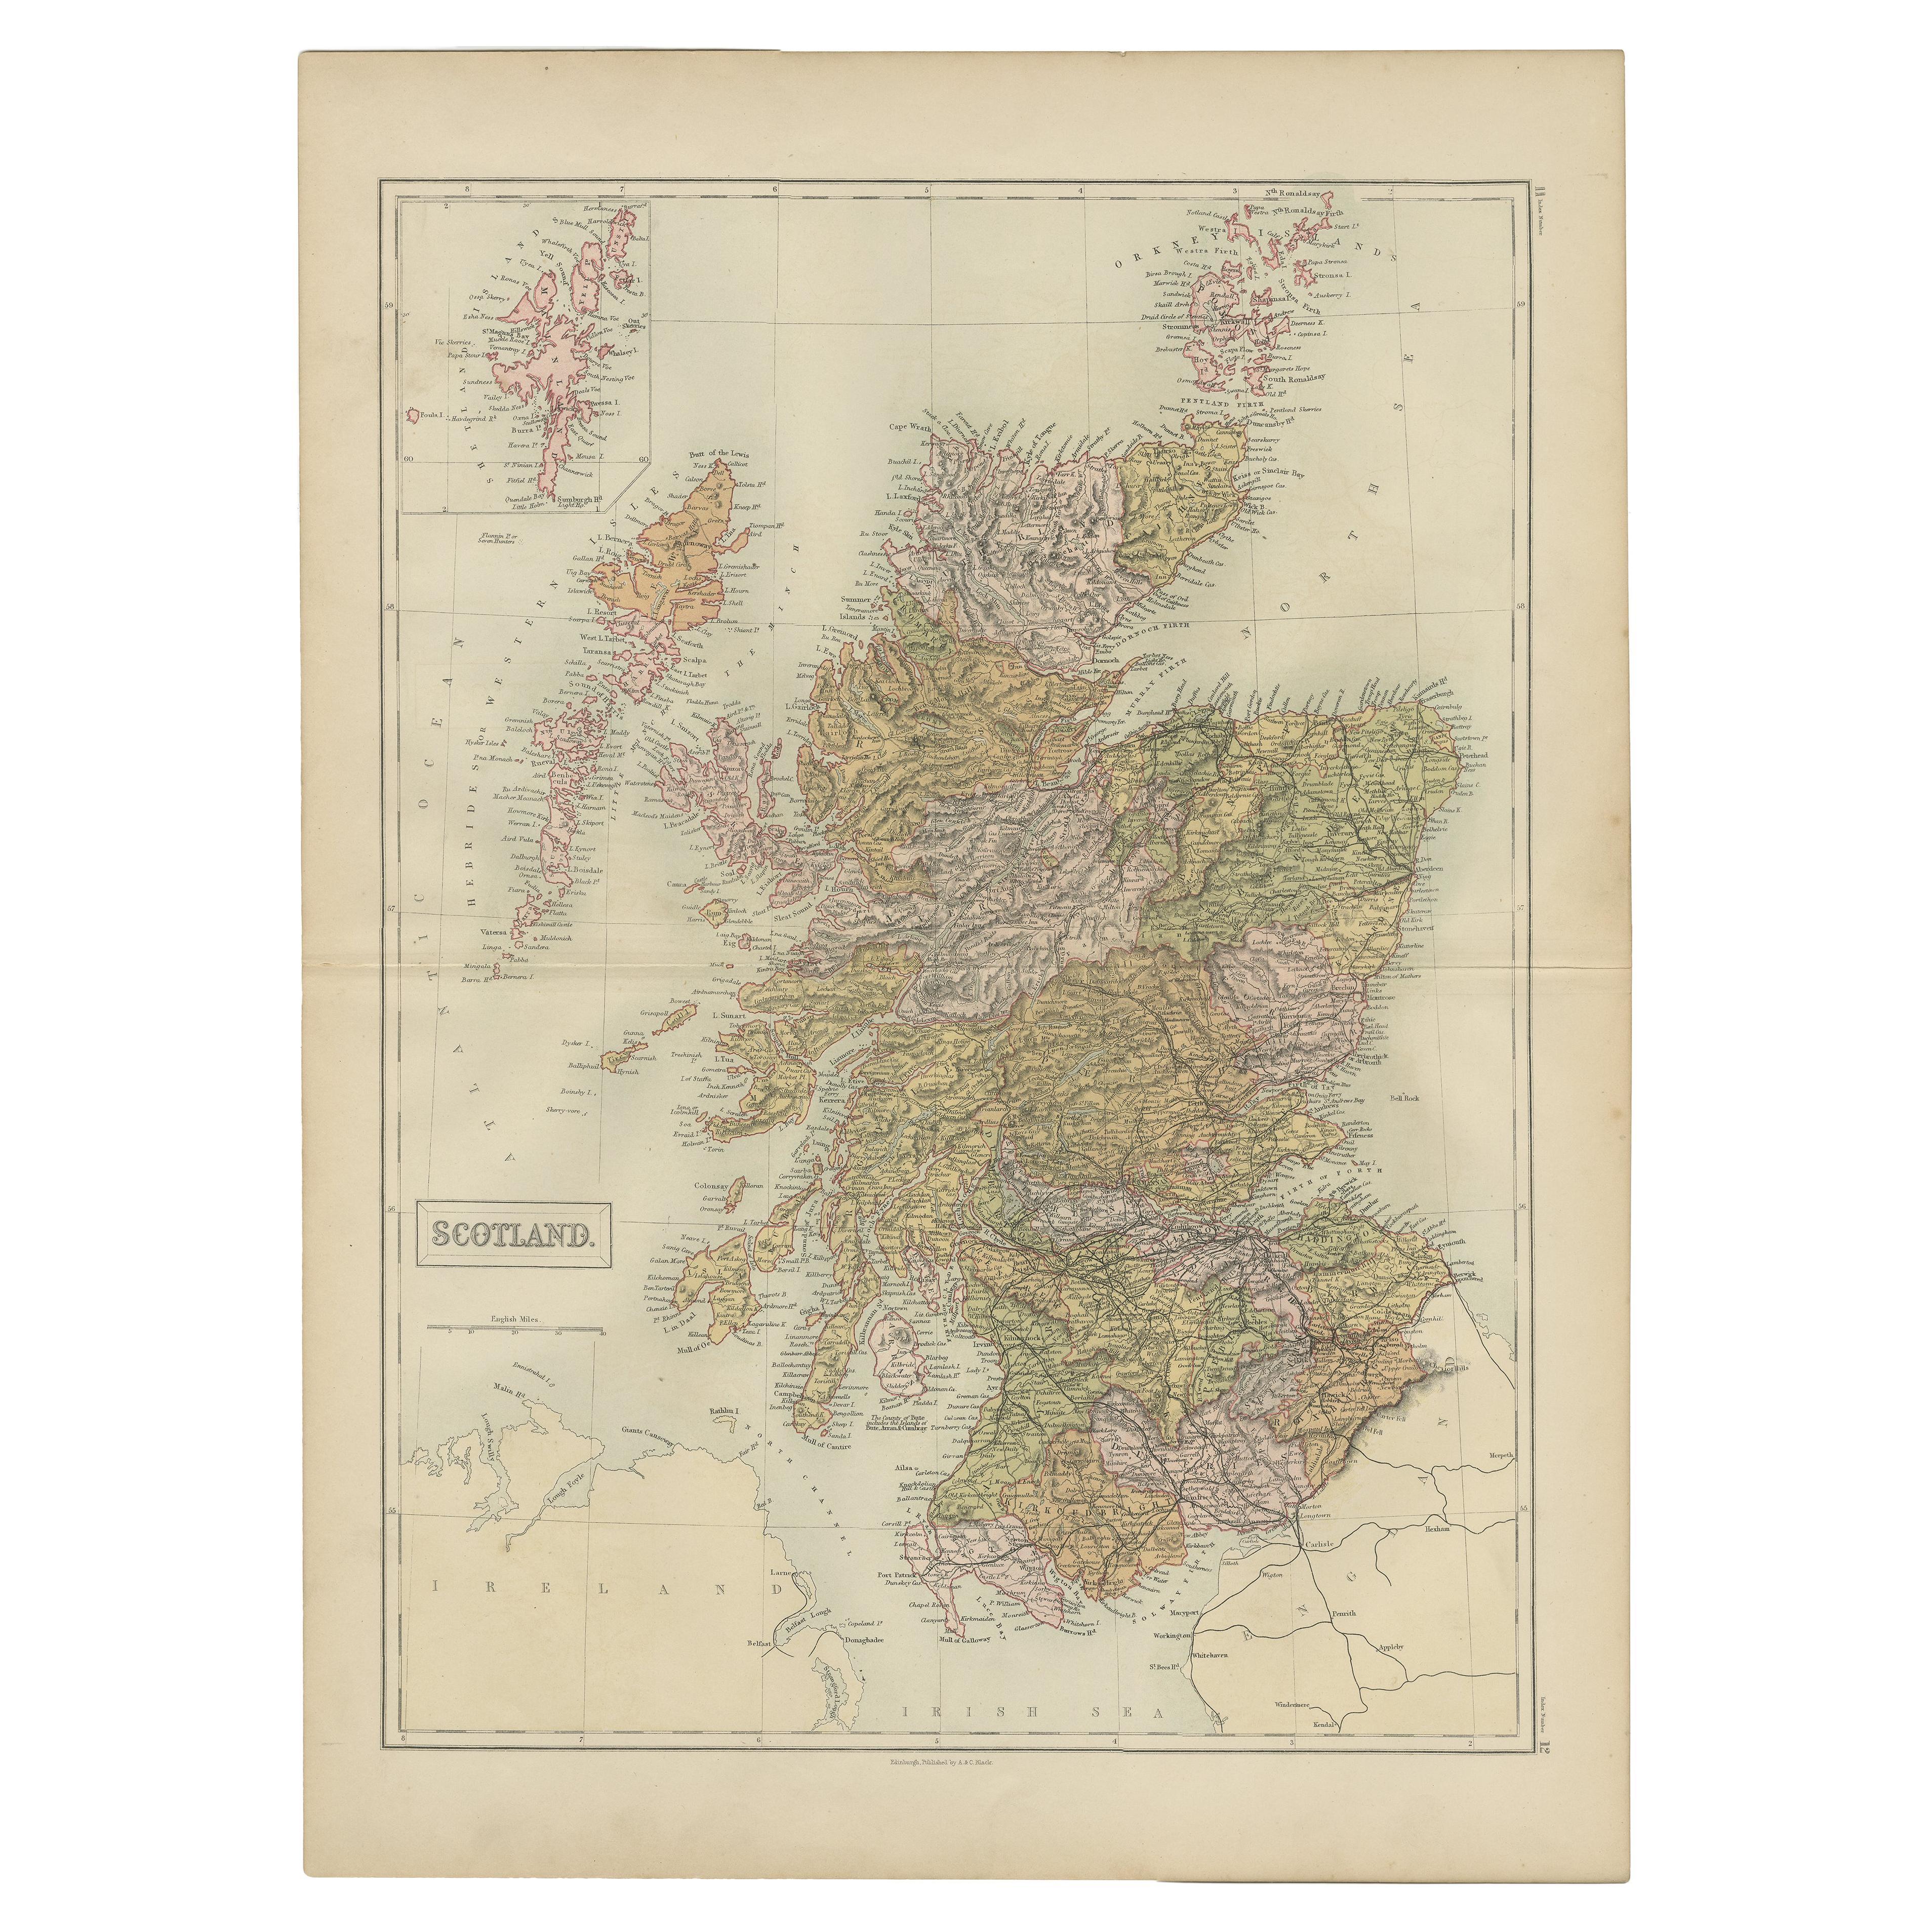 Antique Map of Scotland by A & C. Black, 1870